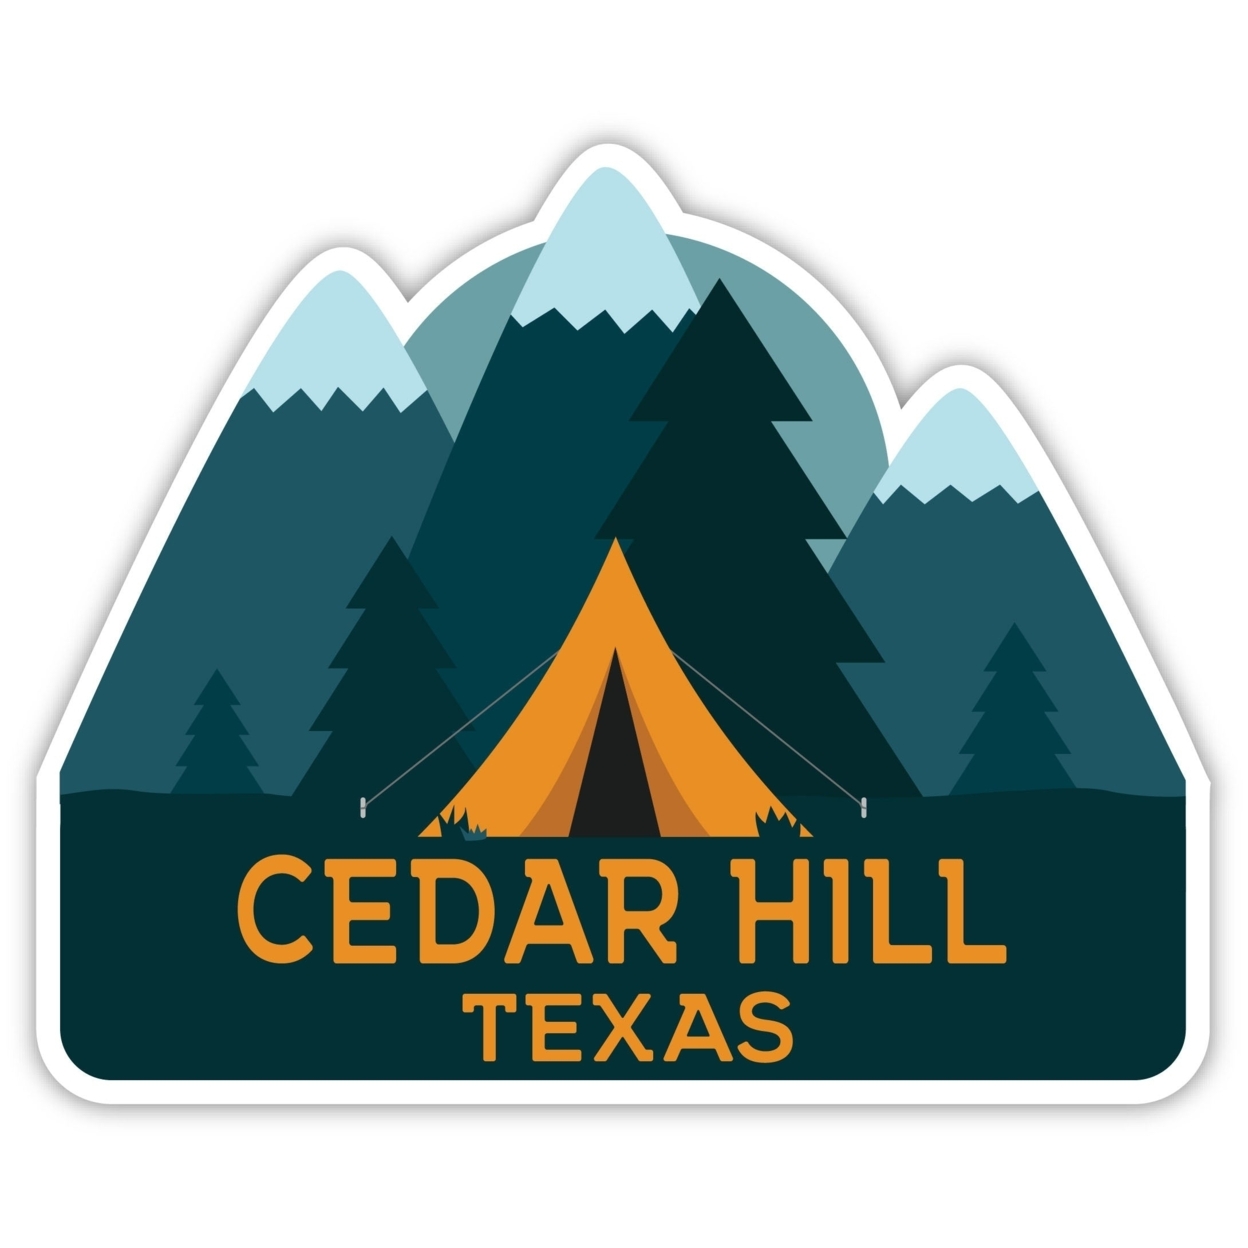 Cedar Hill Texas Souvenir Decorative Stickers (Choose Theme And Size) - 4-Pack, 10-Inch, Tent